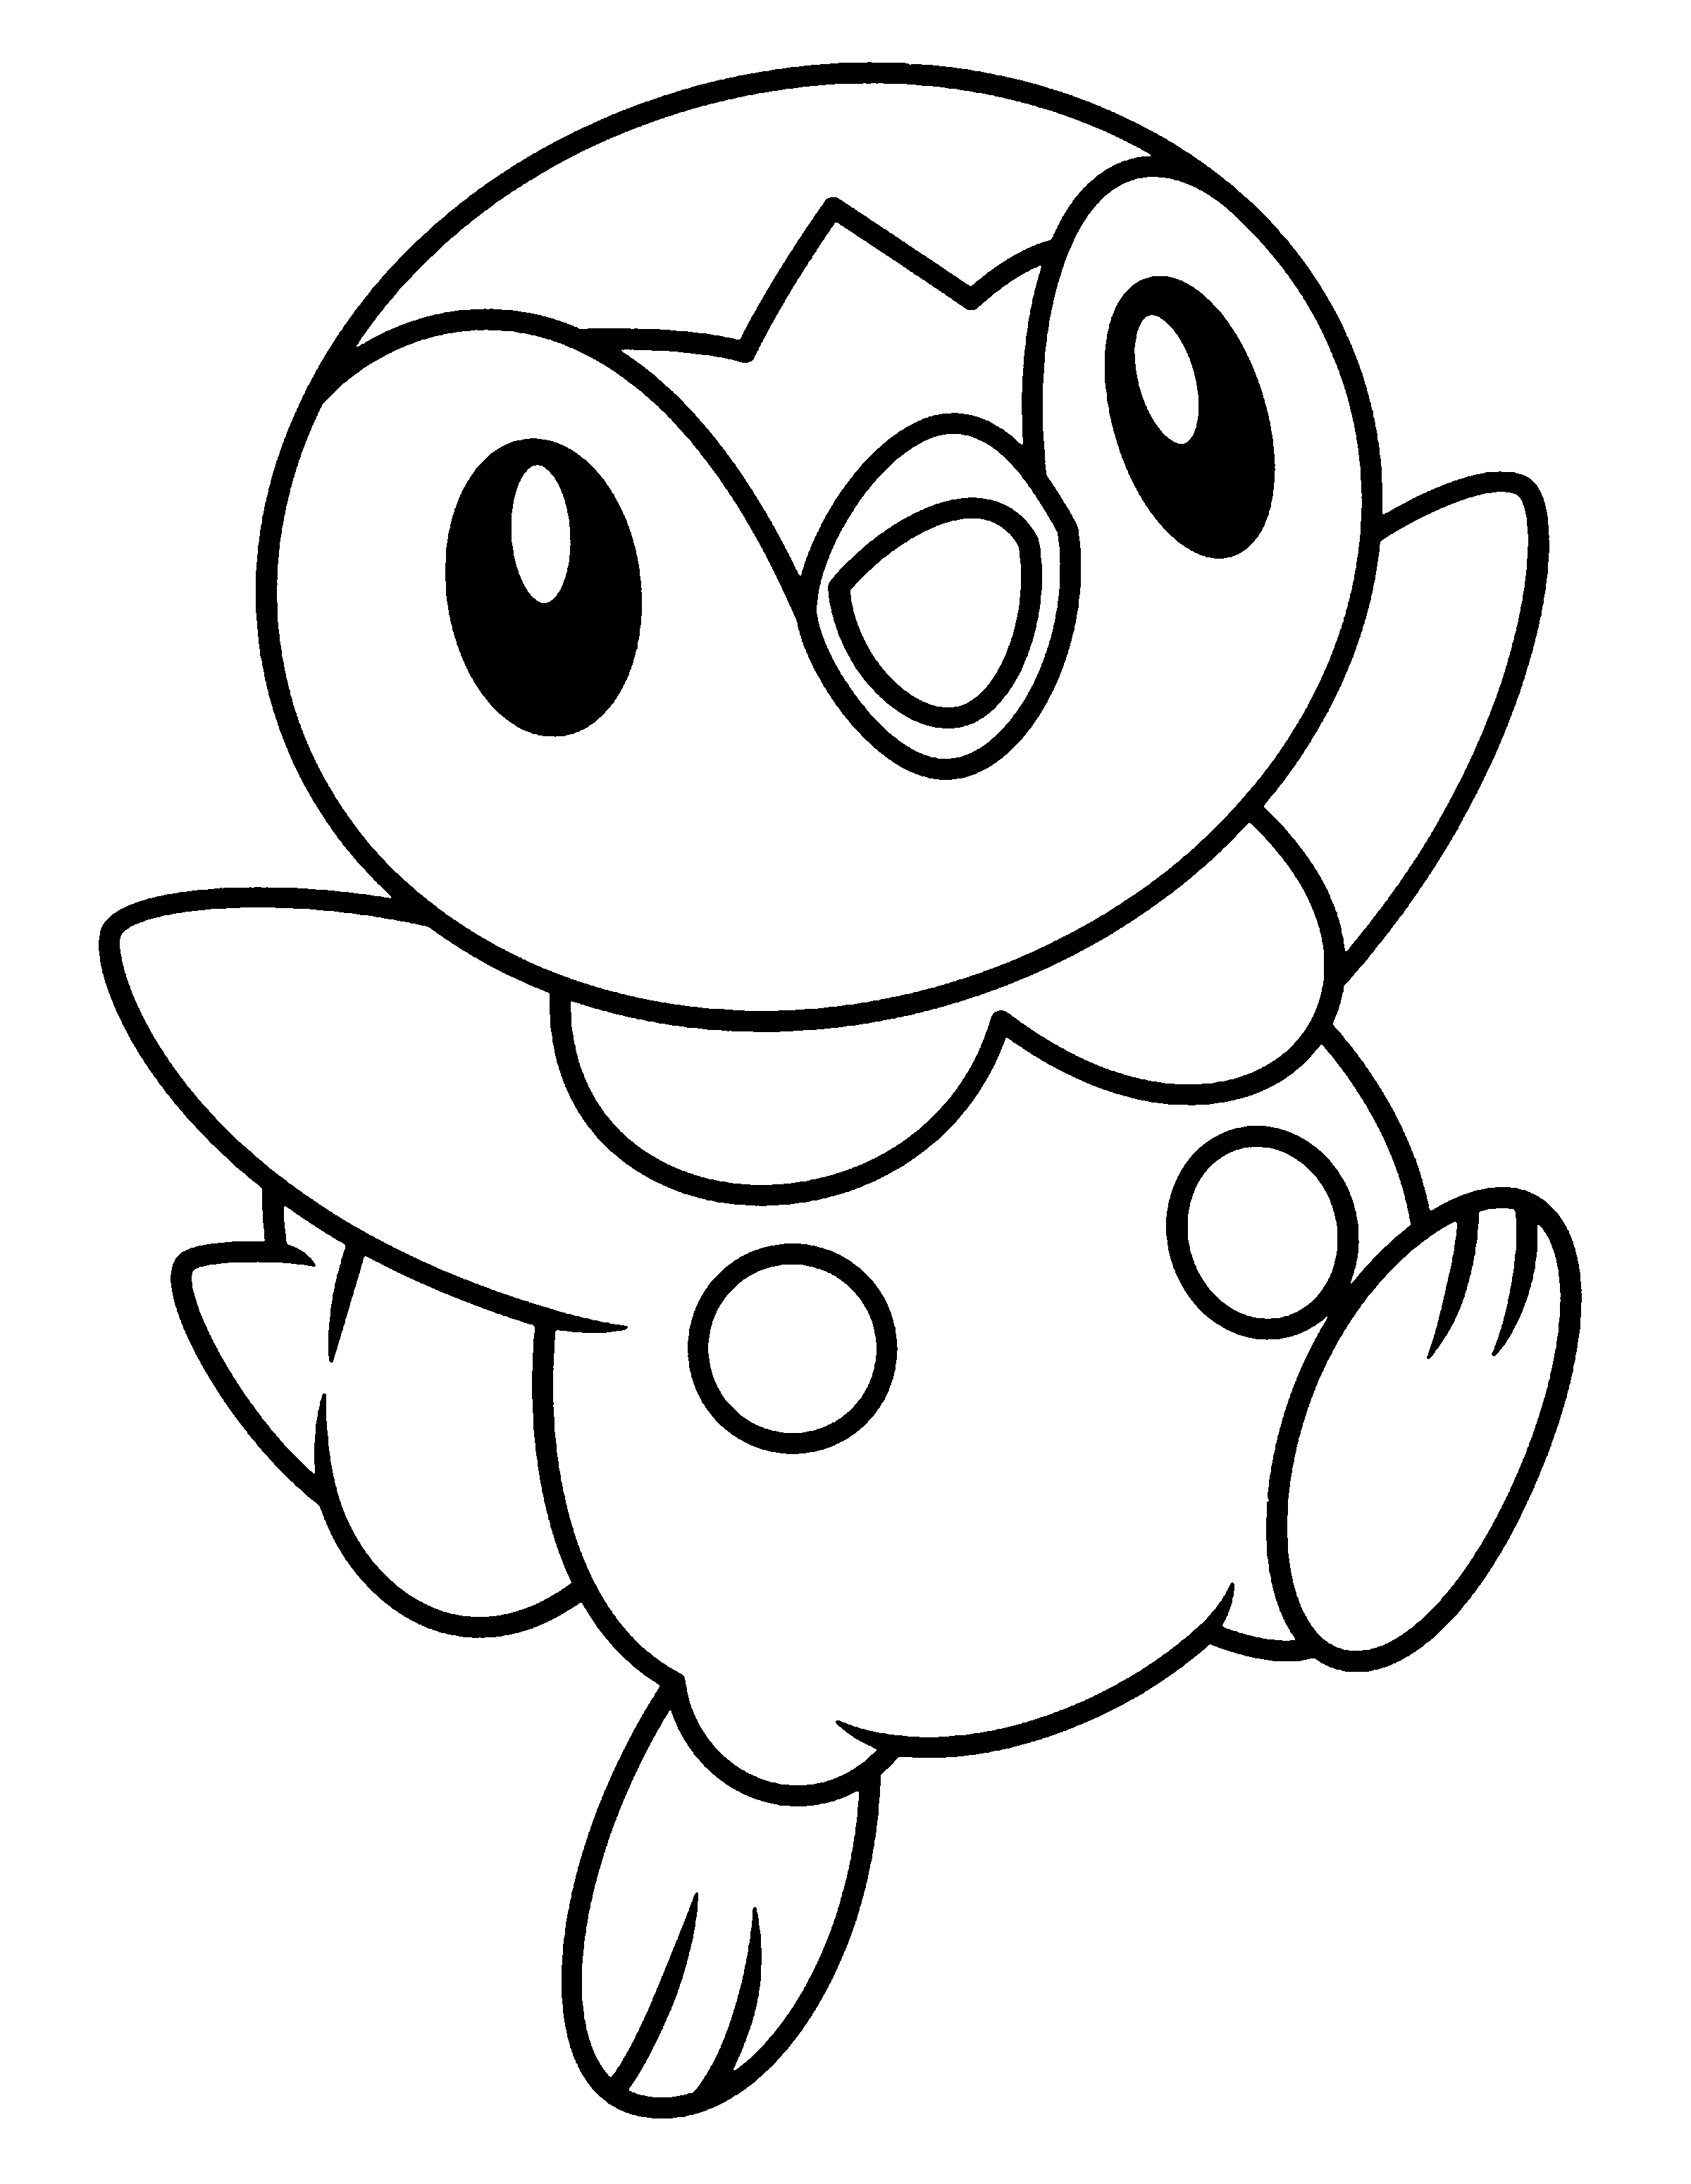 Pokemon Pictures To Color - Coloring Pages for Kids and for Adults